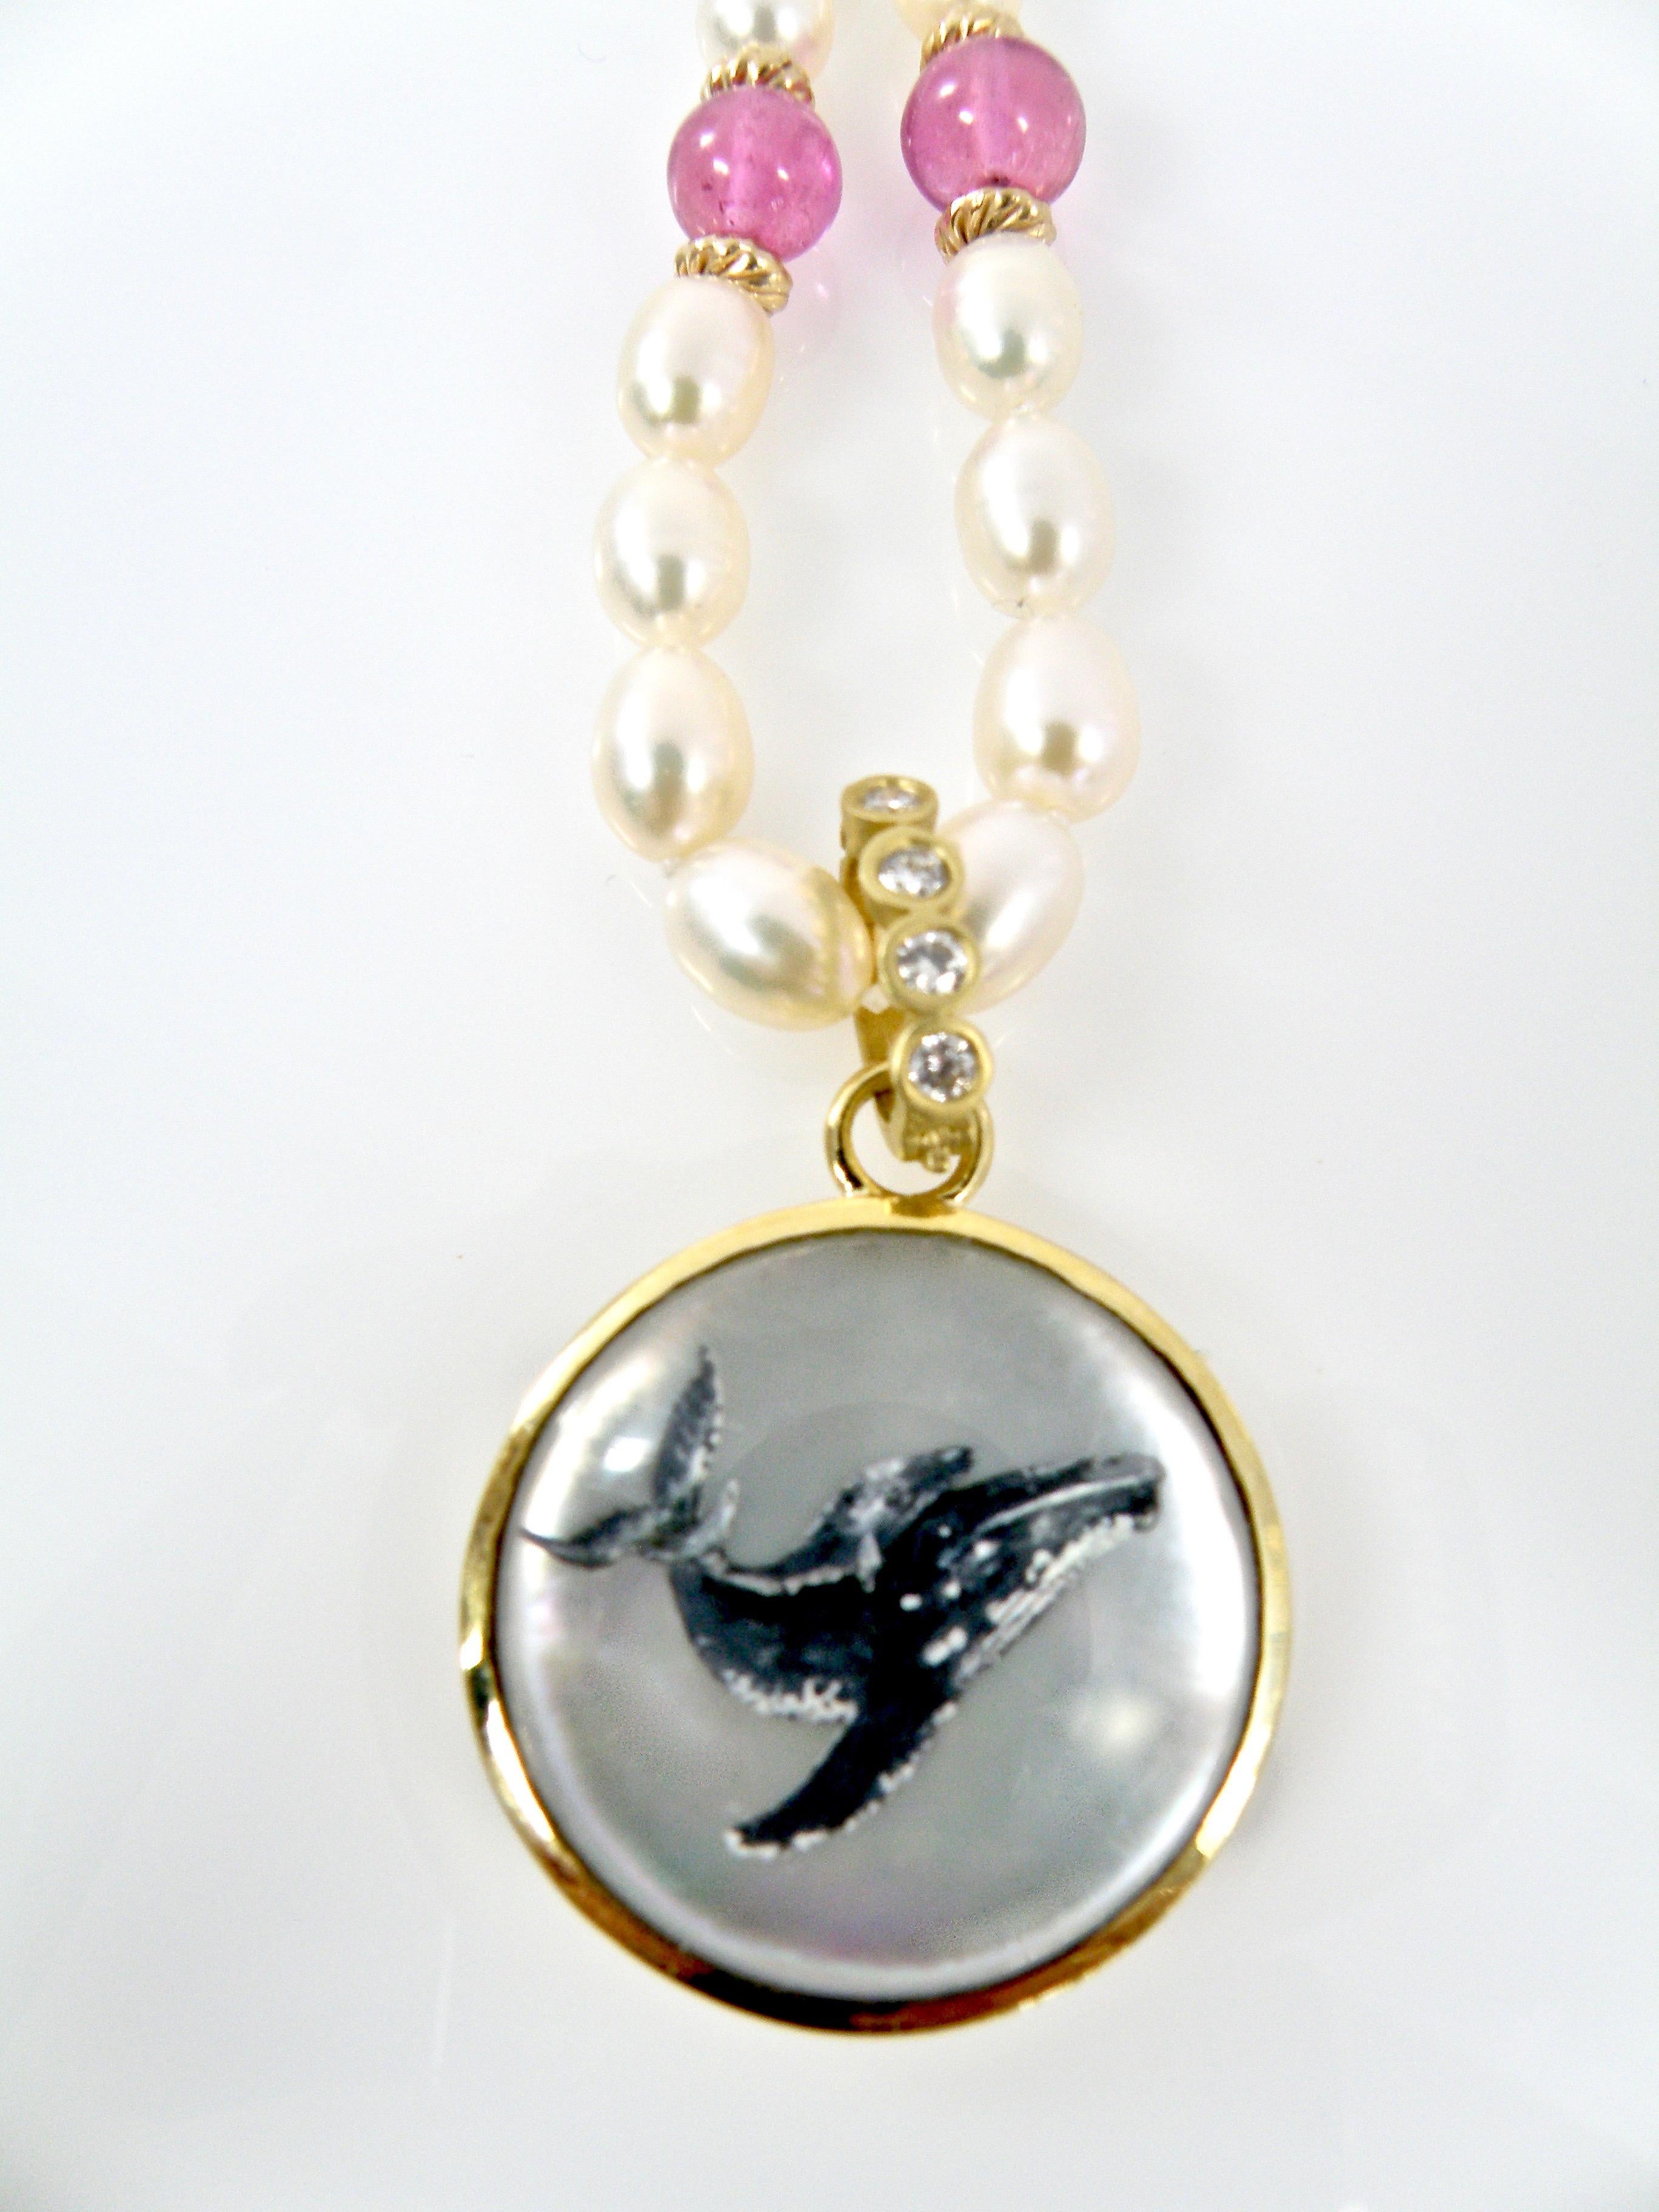 18 Karat  Reverse Crystal Carved Pendant of a Whale Family with a Sapphire bail by Idar Oberstein Carvier